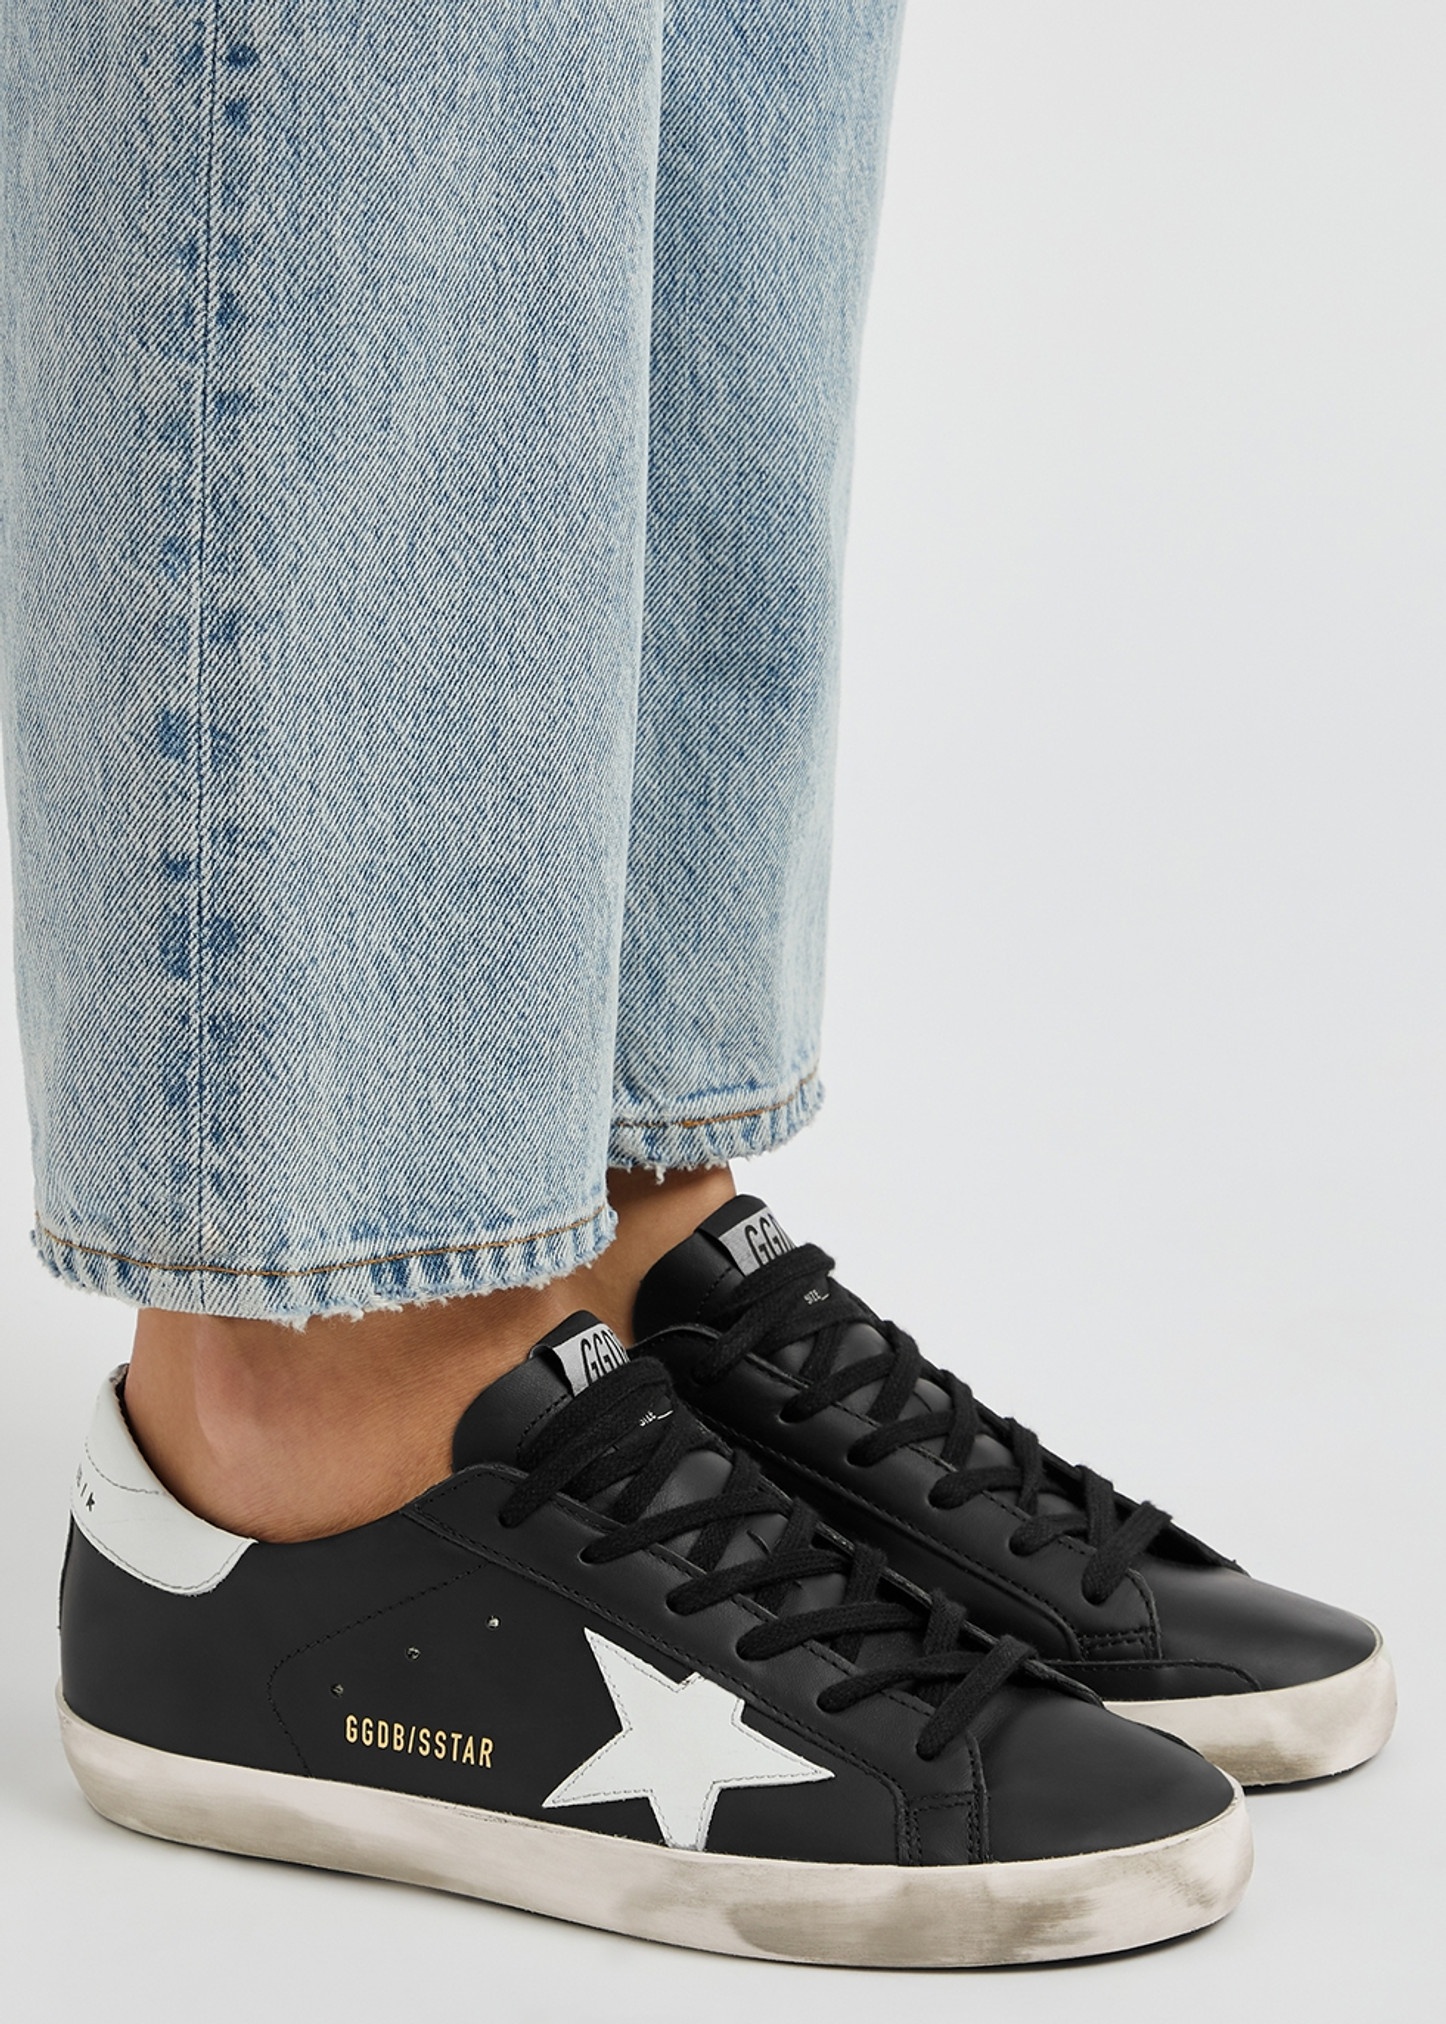 Superstar black distressed leather sneakers - 5